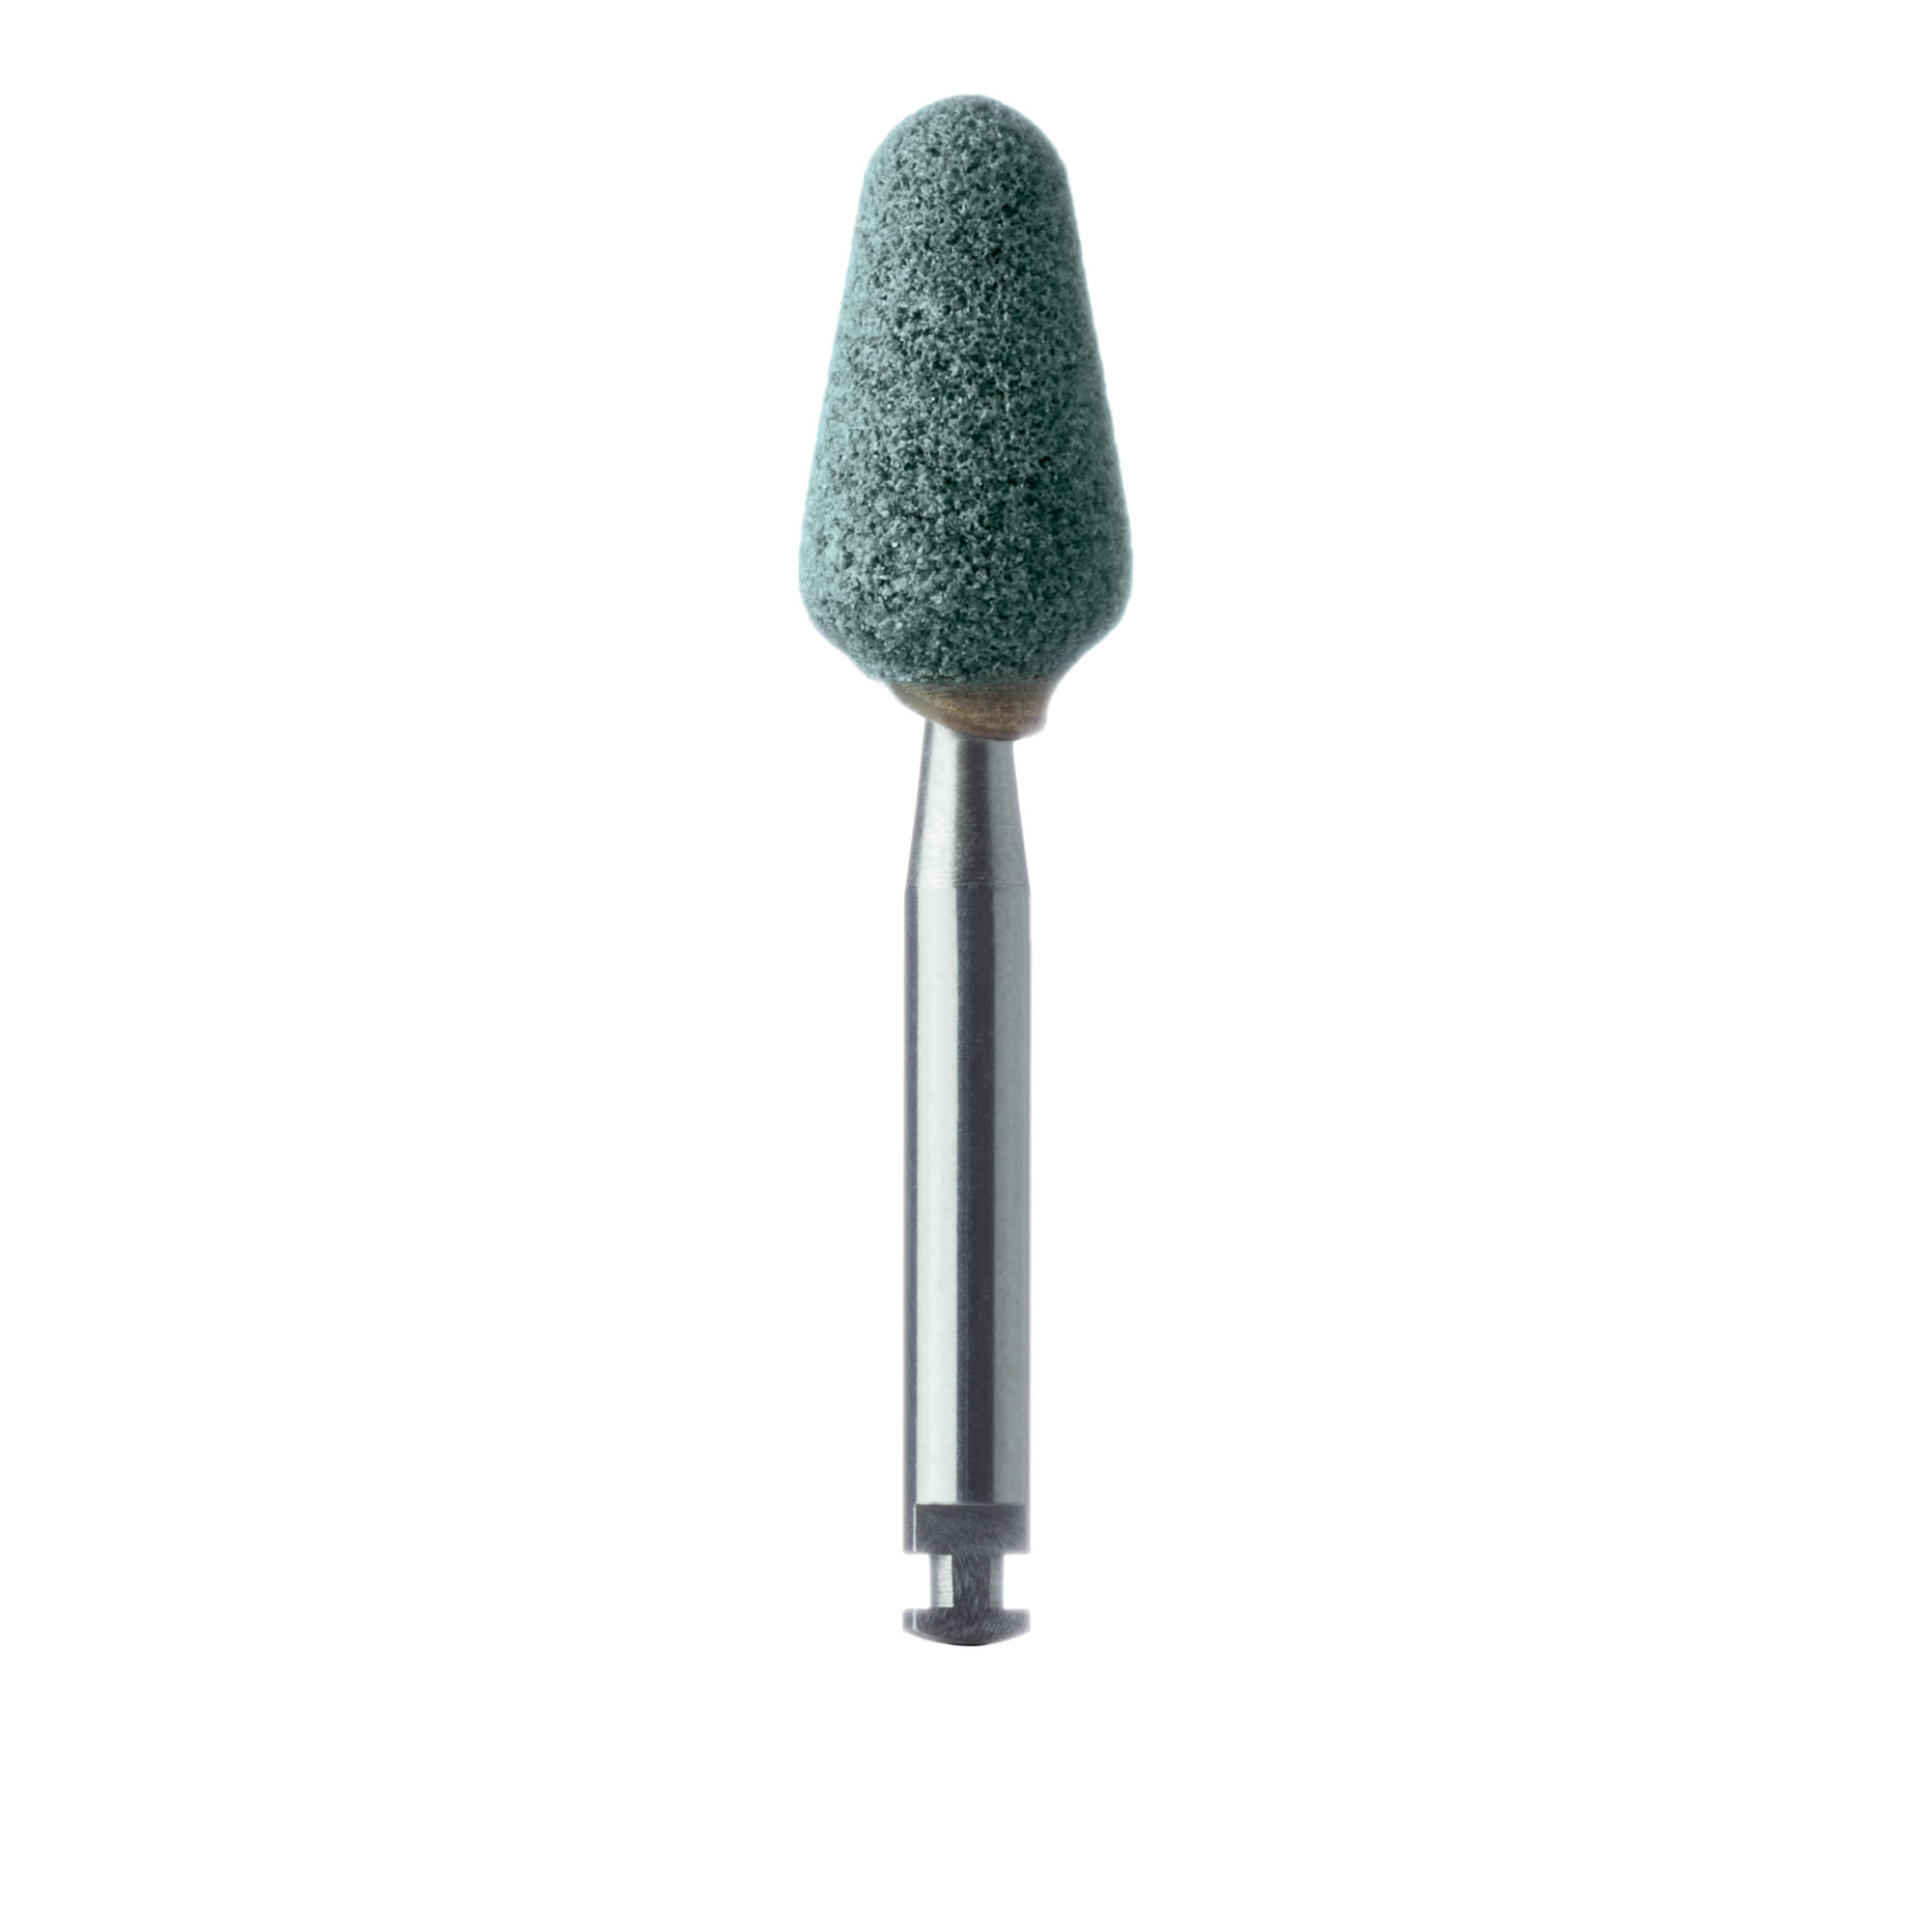 671-060-RA-GRN Abrasive, Green, Wide Nose Cone, 6.0mm RA